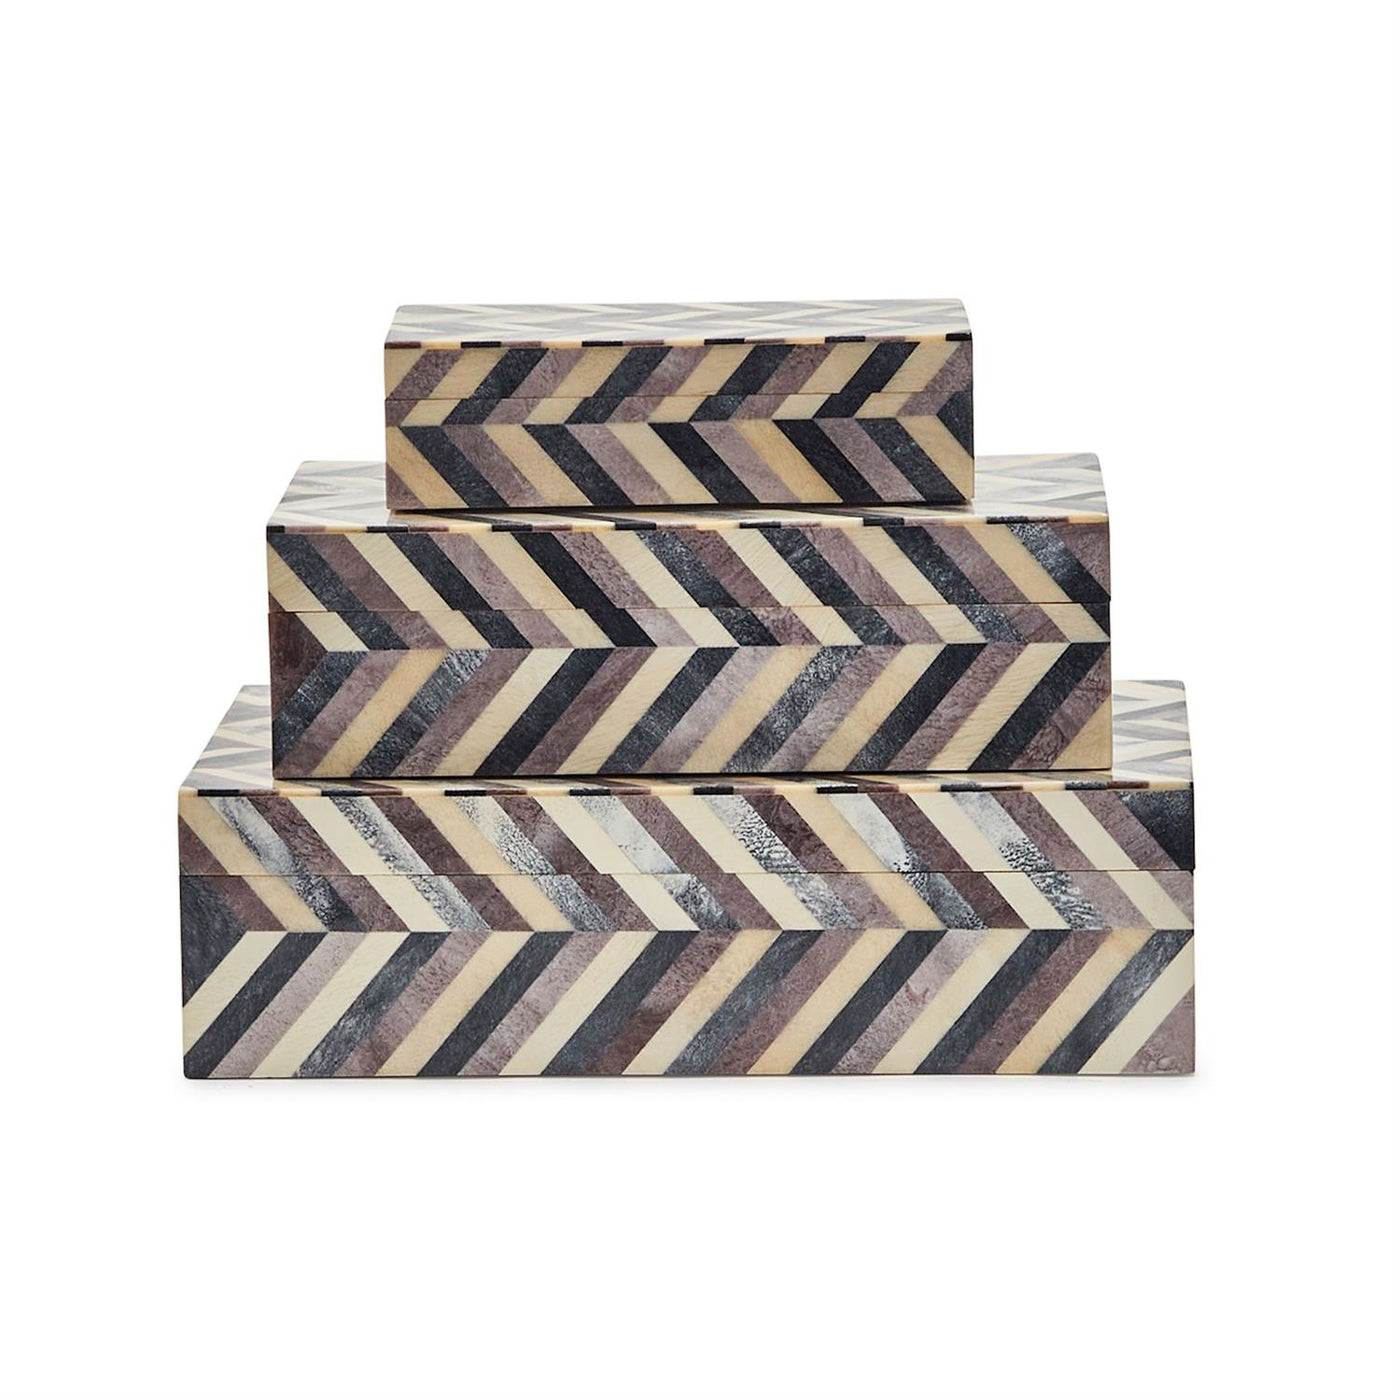 BOX CHEVRON PATTERNED (Available in 3 Sizes)